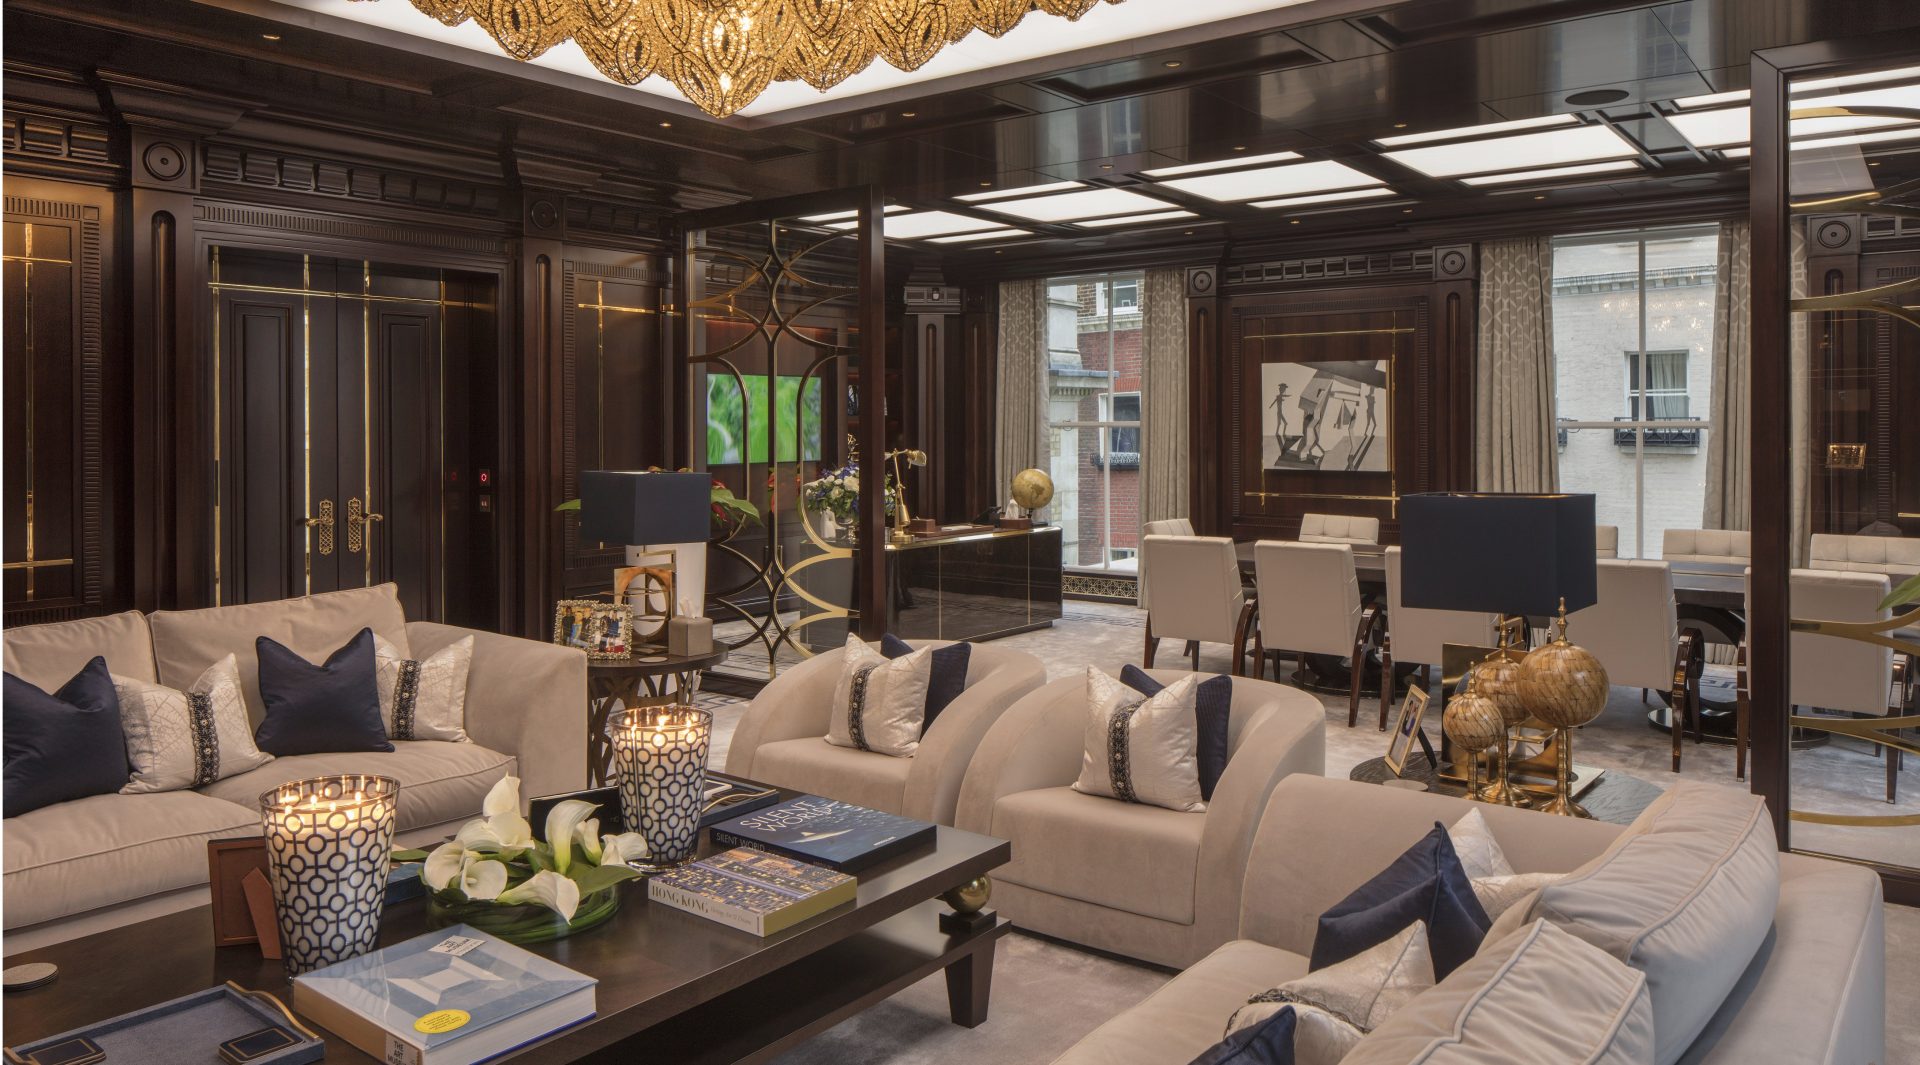 WAG adds millions to the value of Knightsbridge townhouse